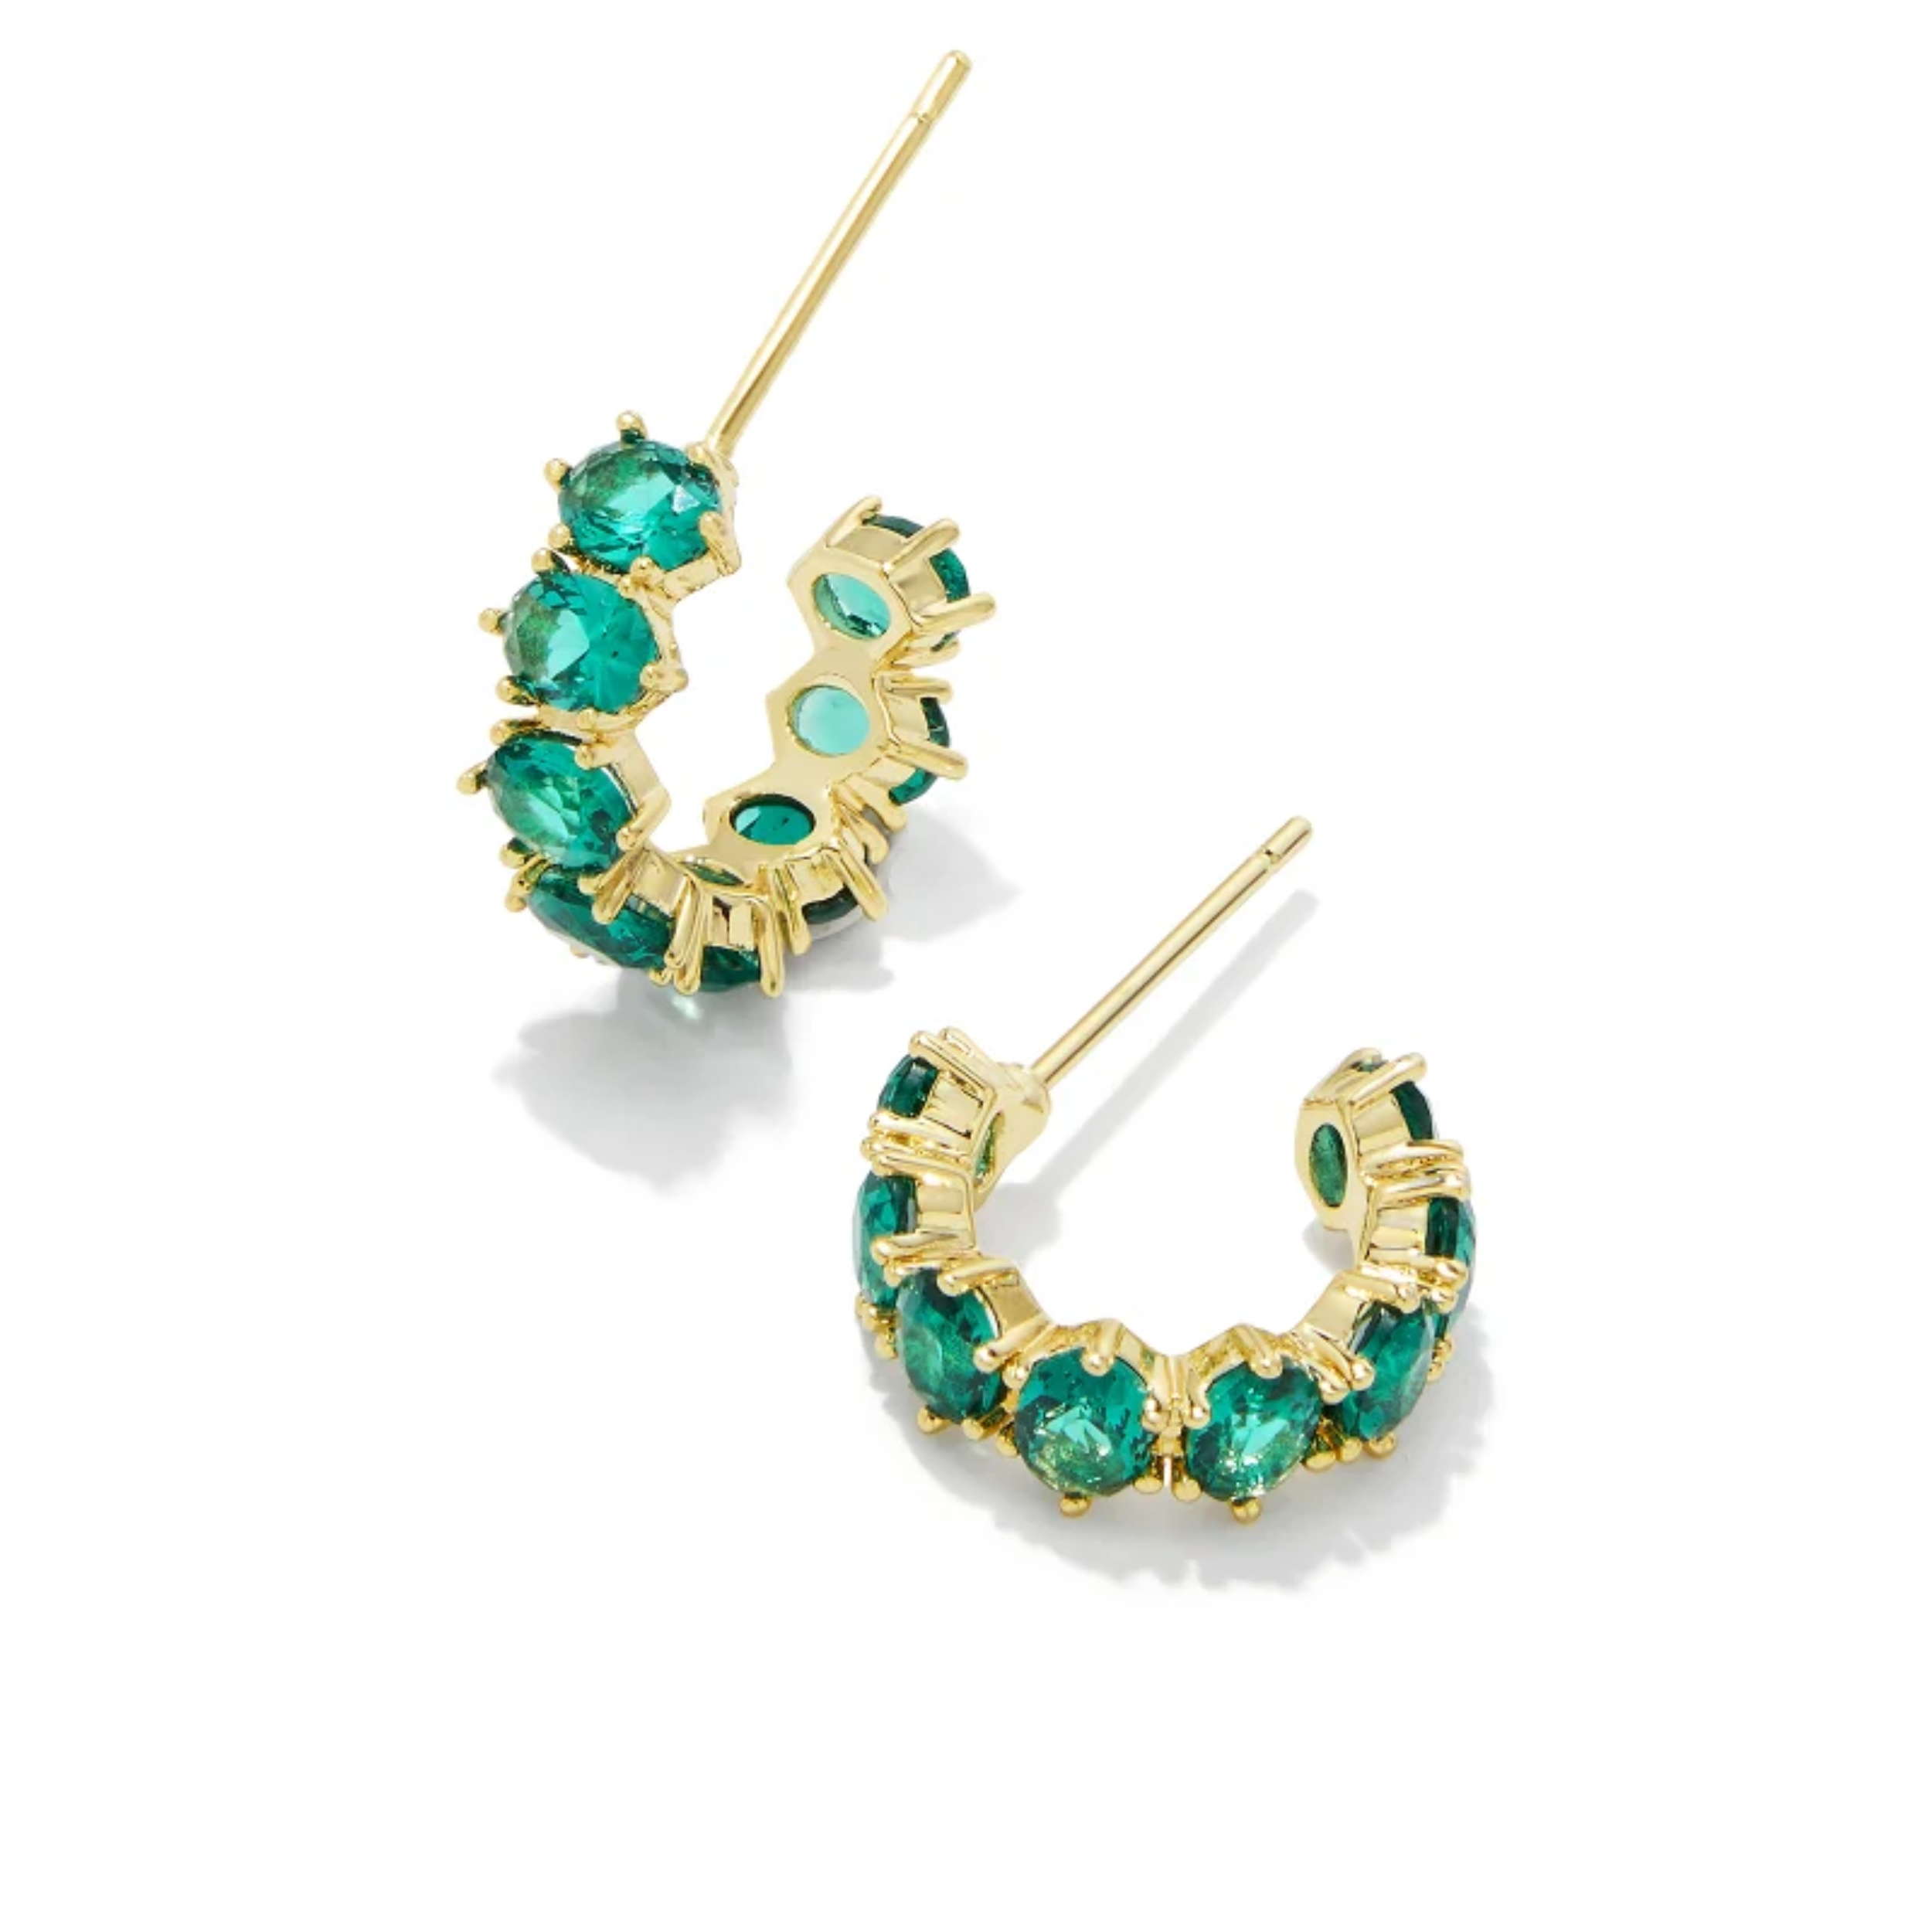 These Cailin Gold Crystal Huggie Earrings in Green Crystal by Kendra Scott are pictured on a white background.